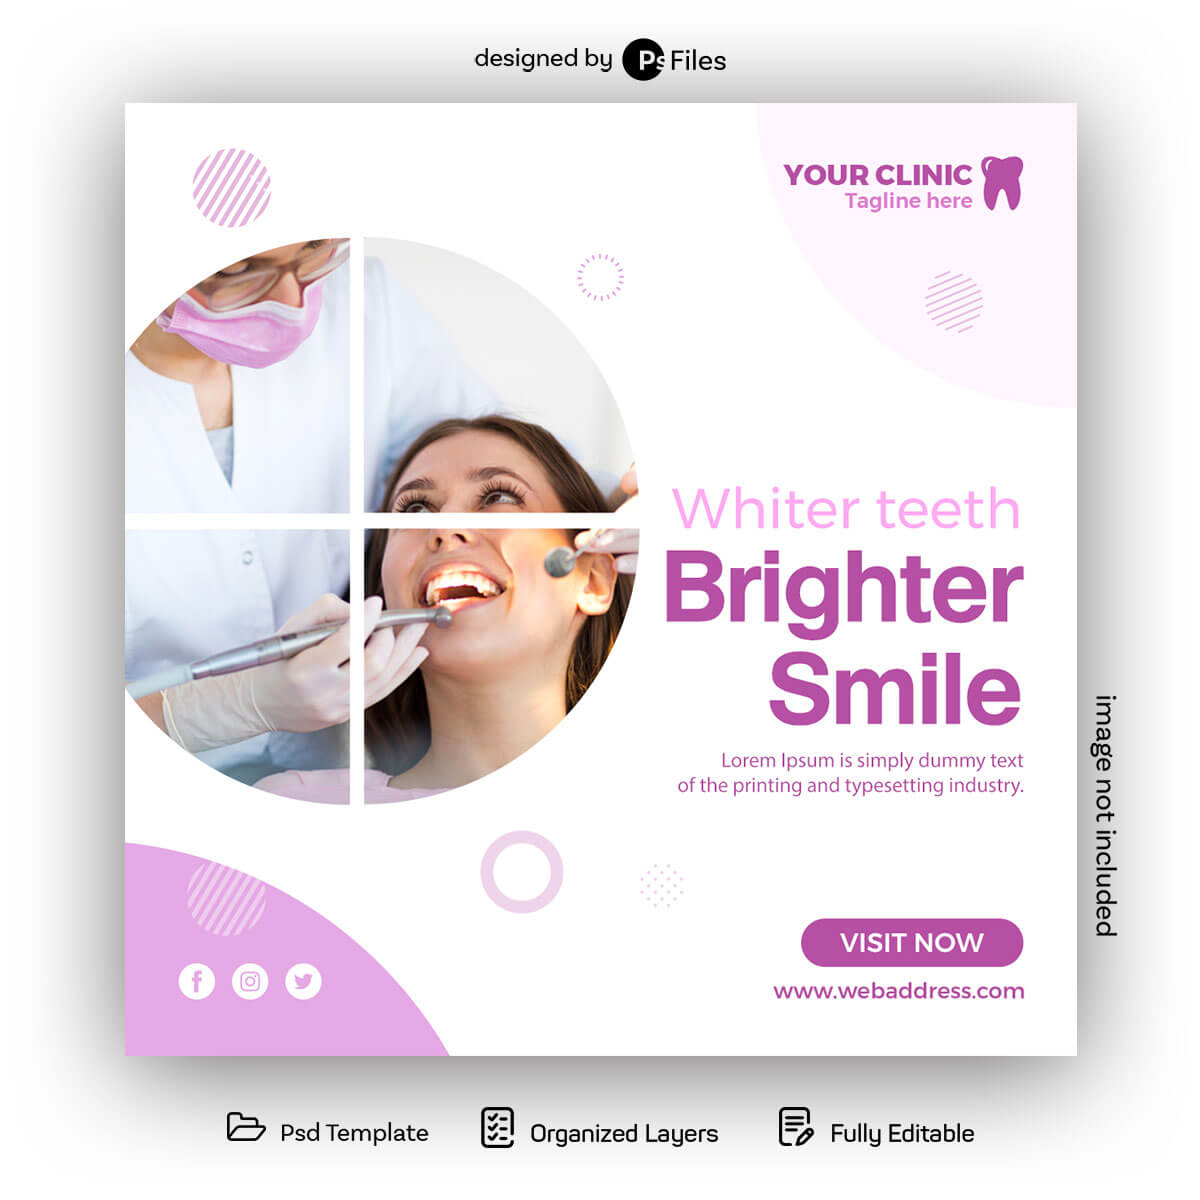 Whiter Teeth Brighter Smile PsFiles Free Dental Care Clinic Instagram Post Design PSD Template